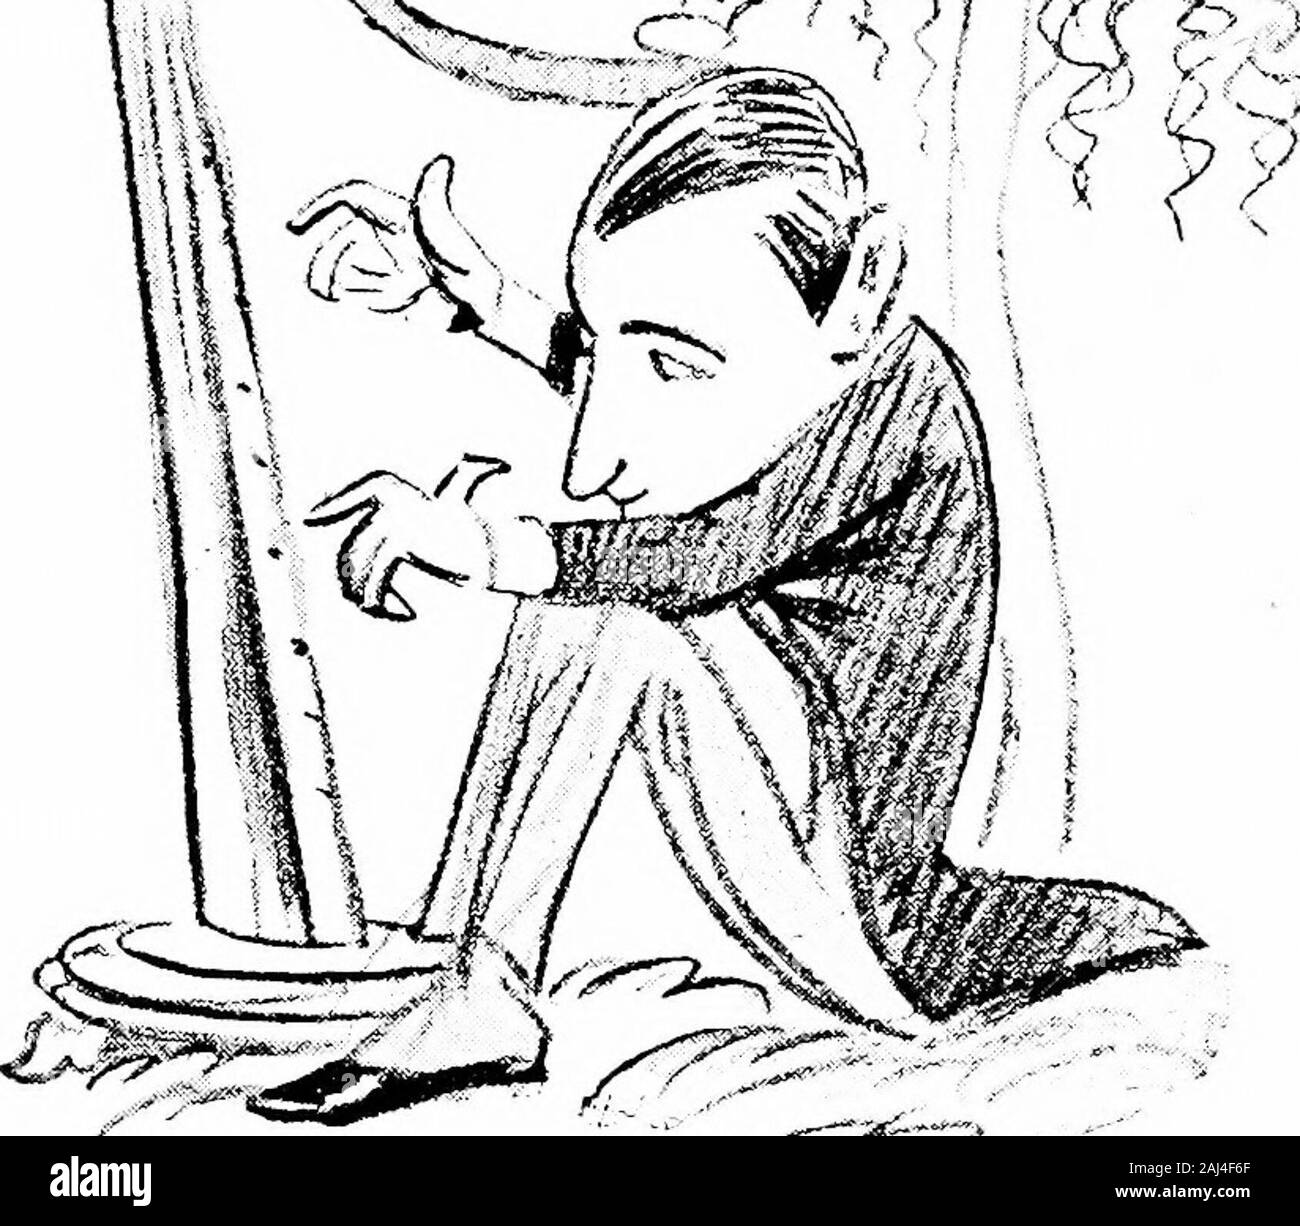 Confessions of a caricaturist . i.riHVtilVMMl^t3^^iMnif-air1:iaMimi^ WilBMBMI I I iwirii ..^ Guglielmo Marconi I like Marconi best to seeBeneath a Macaroni treePlaying that Nocturne in F SharpBy Chopin, on a Wireless Harp. 22 ^^HAtenMiMWSftdfGtoc ^-^^m... -V^^- George Bernard Shaw The very name of Bernard Shaw Fills me with mingled Mirth and Awe. Mixture of Mephistopheles, Don Quixote, and Diogenes, The Devils wit, the Dons Romance Joined to the Cynics arrogance. Framed on Pythagorean plan, A Vegetable Souperman. Here you may see him crown with bay The Greatest Playwright of his day;* Observe Stock Photo